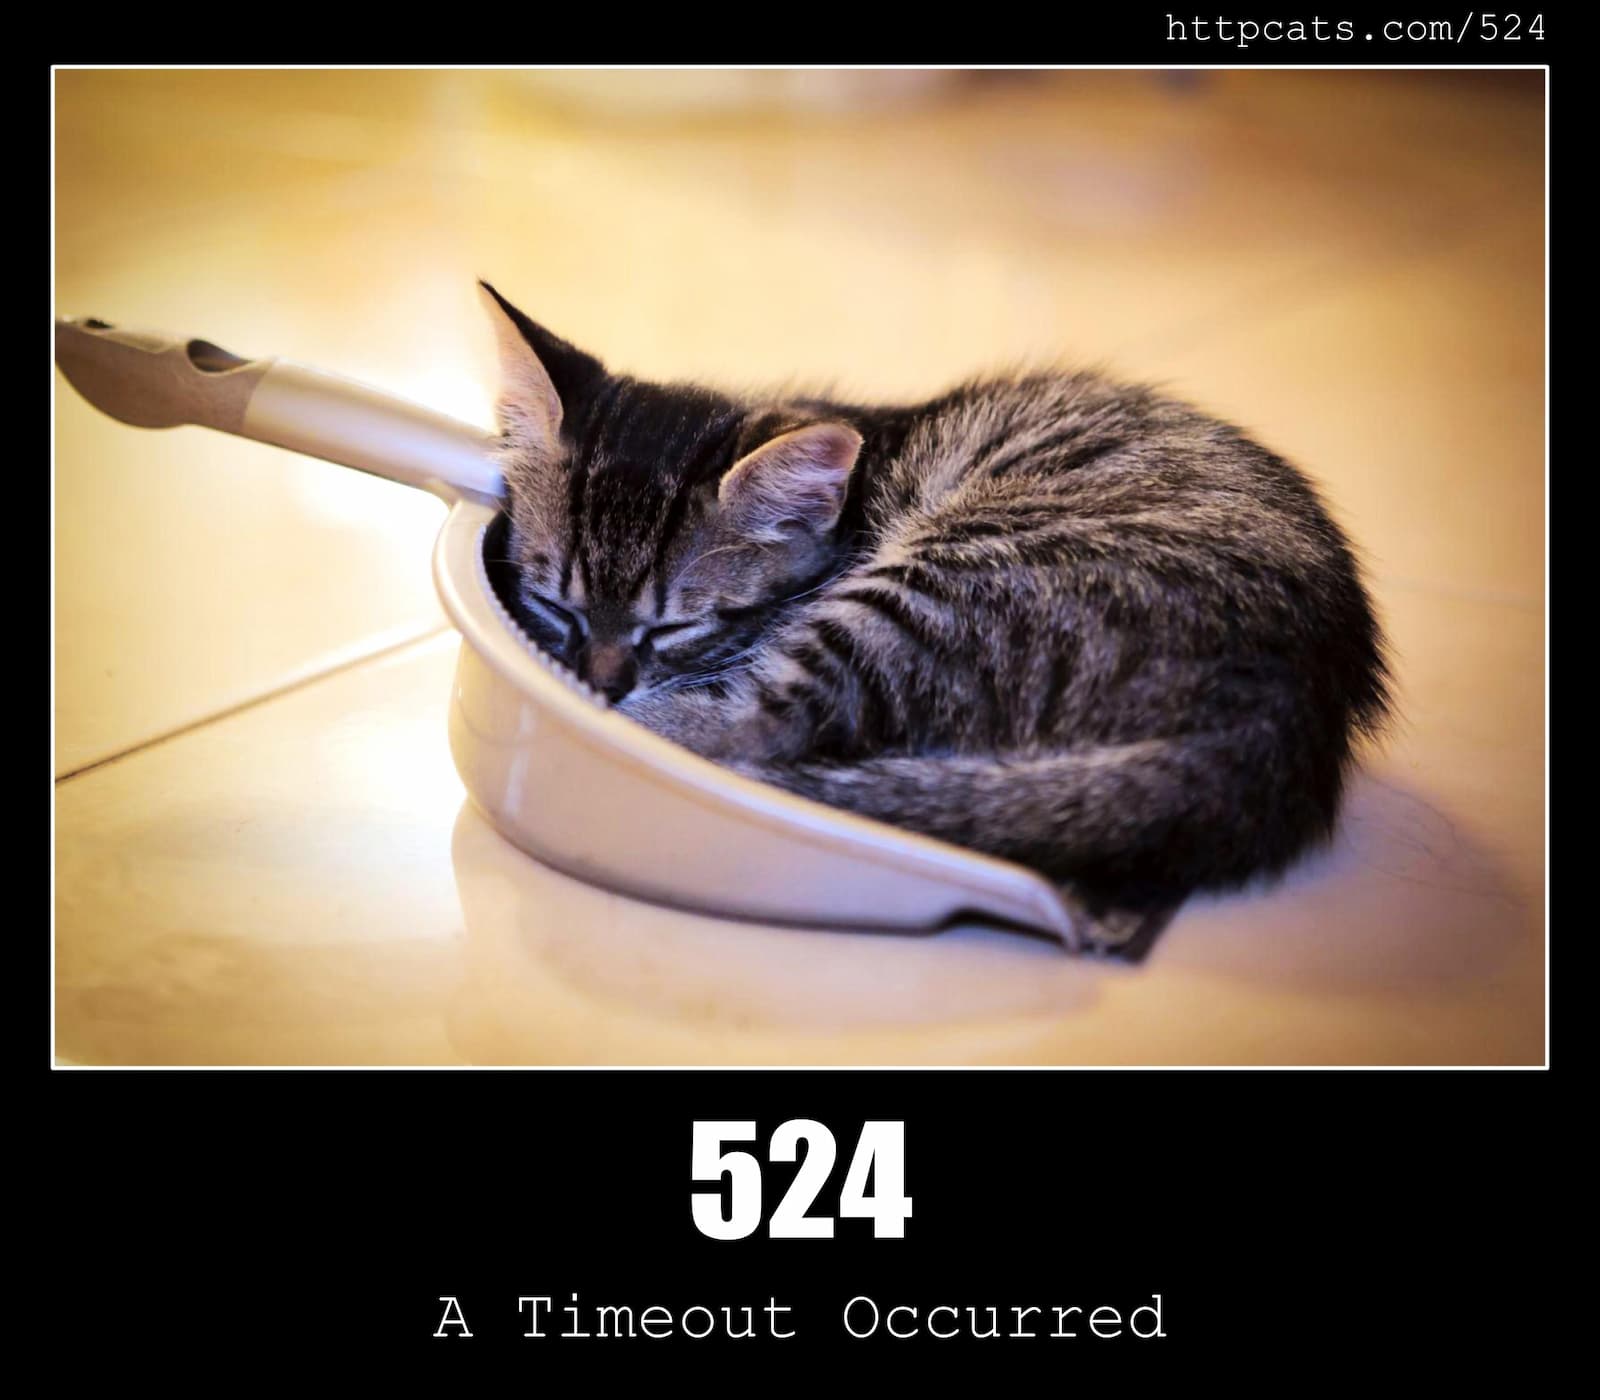 HTTP Status Code 524 A Timeout Occurred & Cats